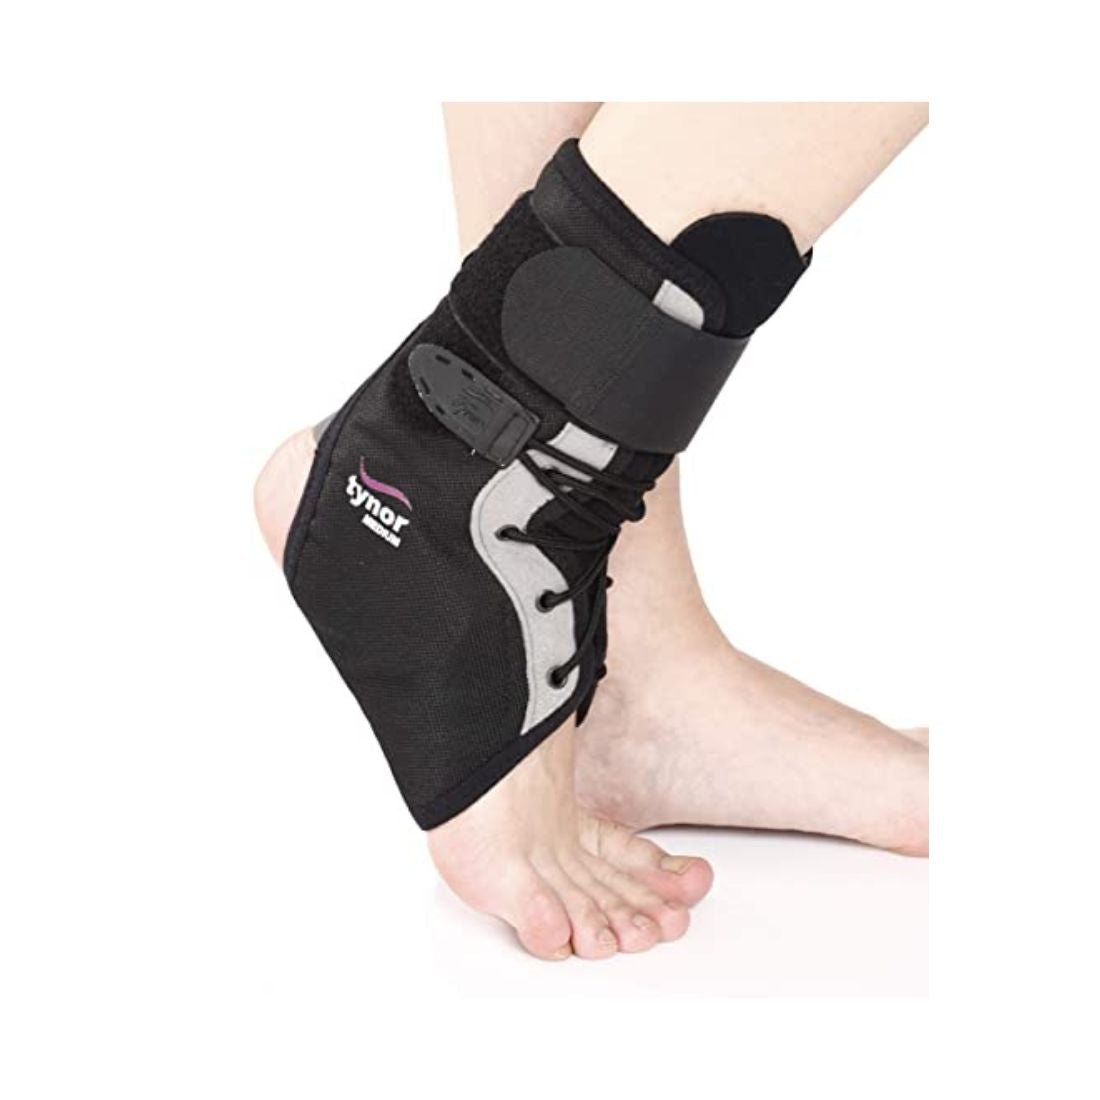 Buy ankle brace to support, stabilize, and limit the range-of-motion of the ankle joint. in injury, or offer protection to people who are prone to ankle injuries.